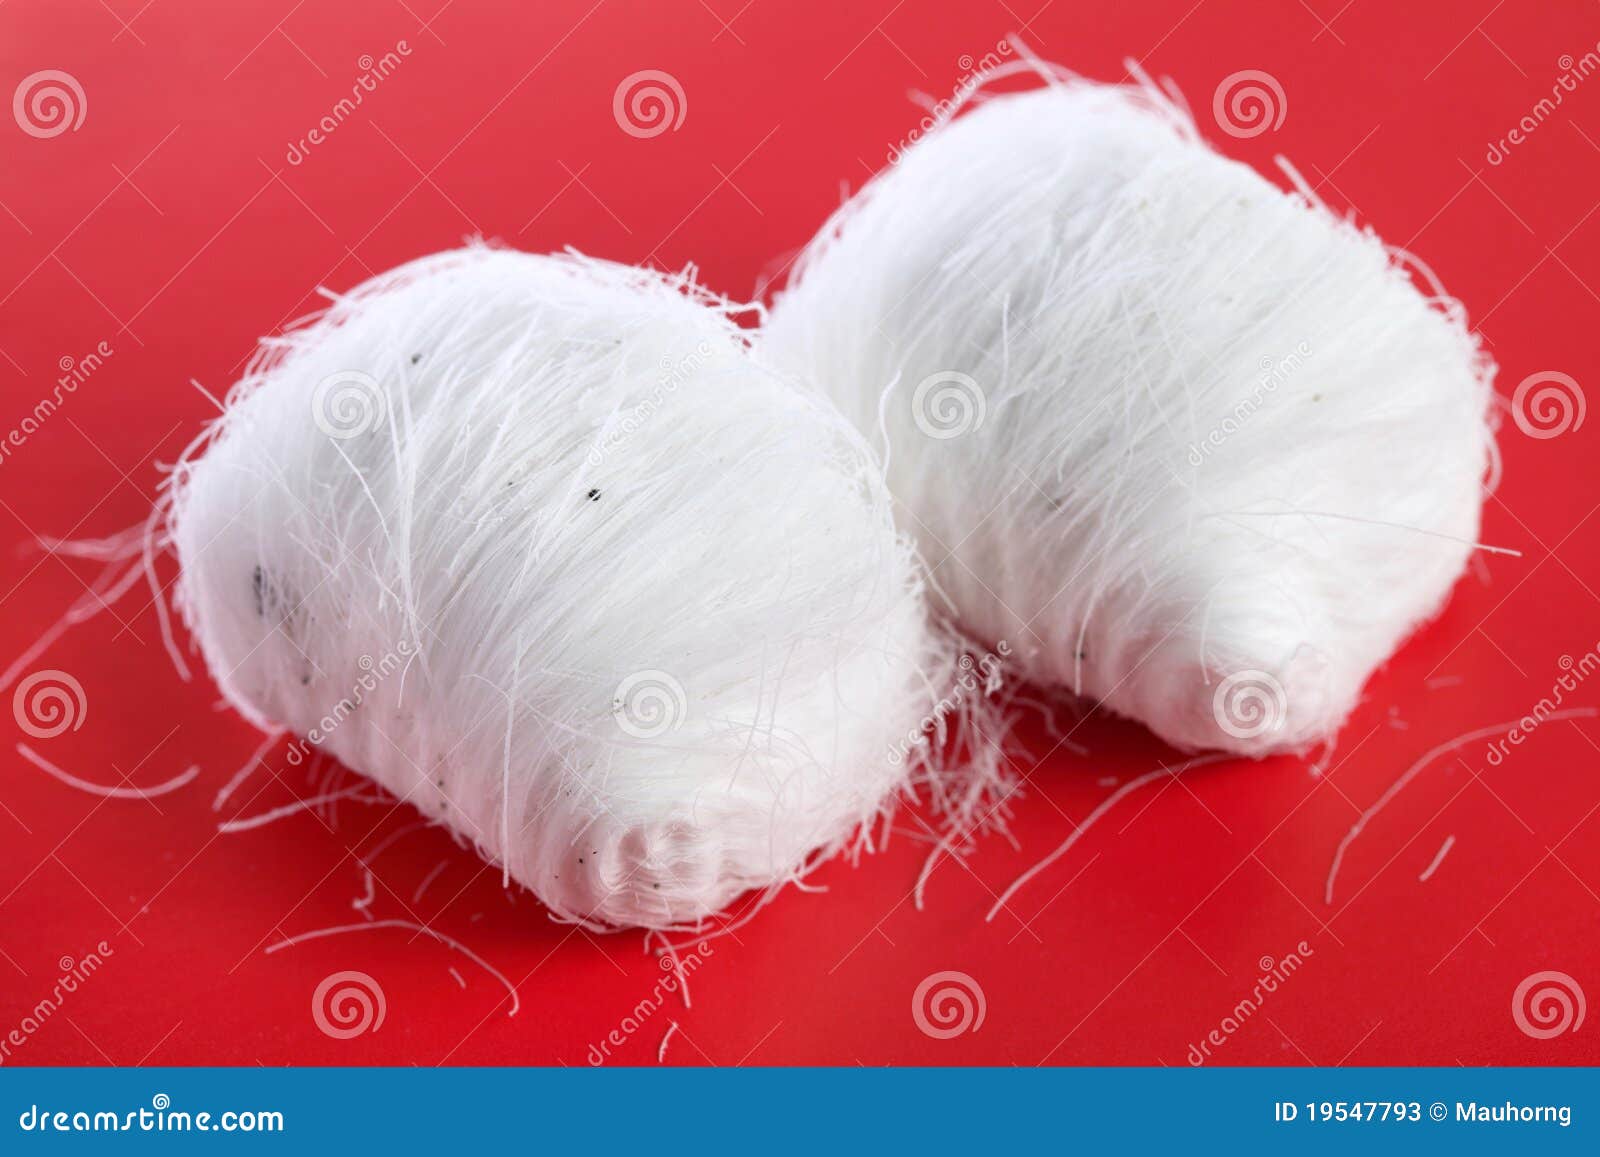 1 073 Beard Candy Photos Free Royalty Free Stock Photos From Dreamstime